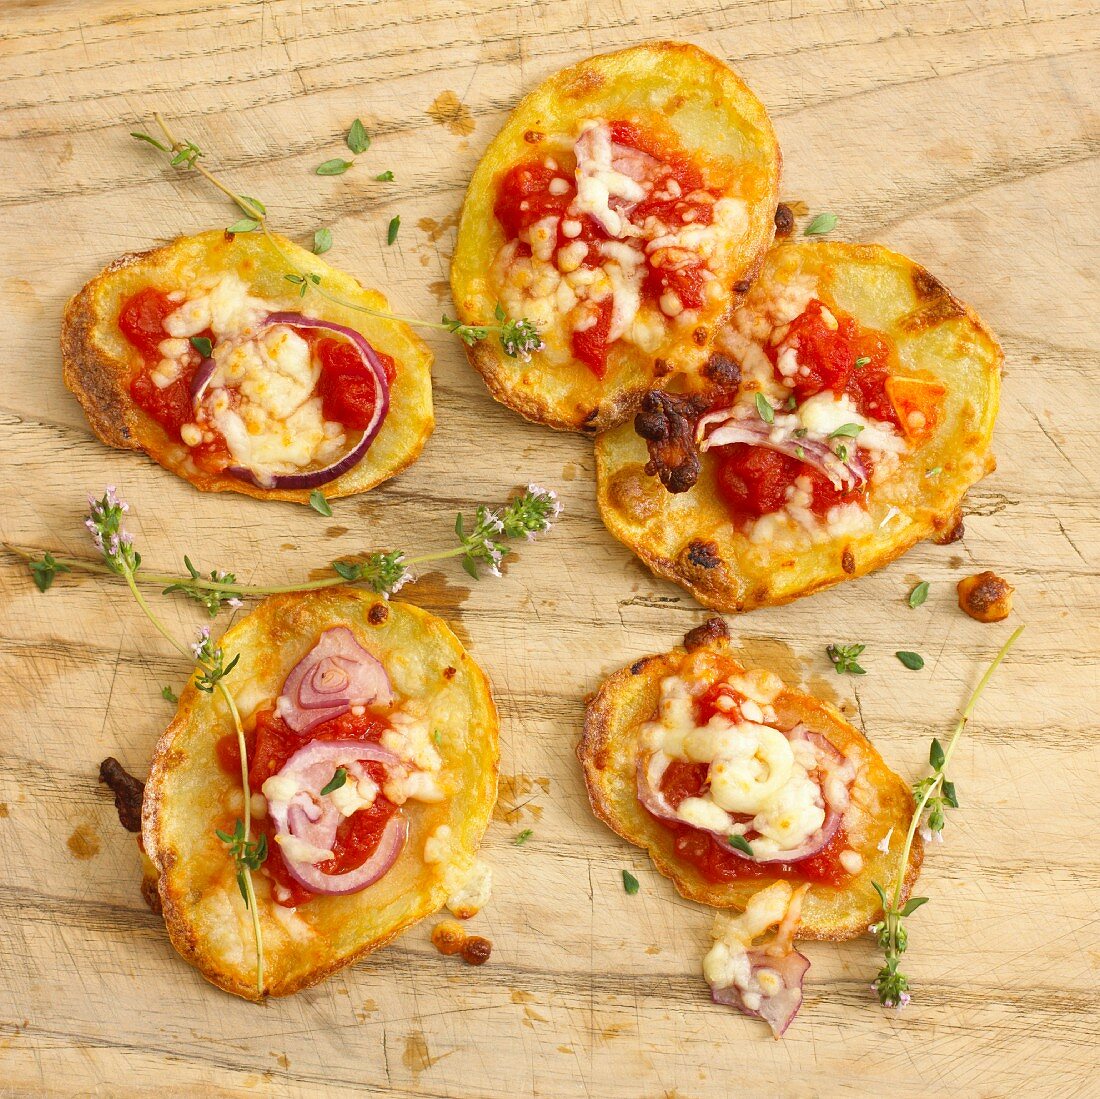 Crispy potato cakes with tomatoes, onions and cheese